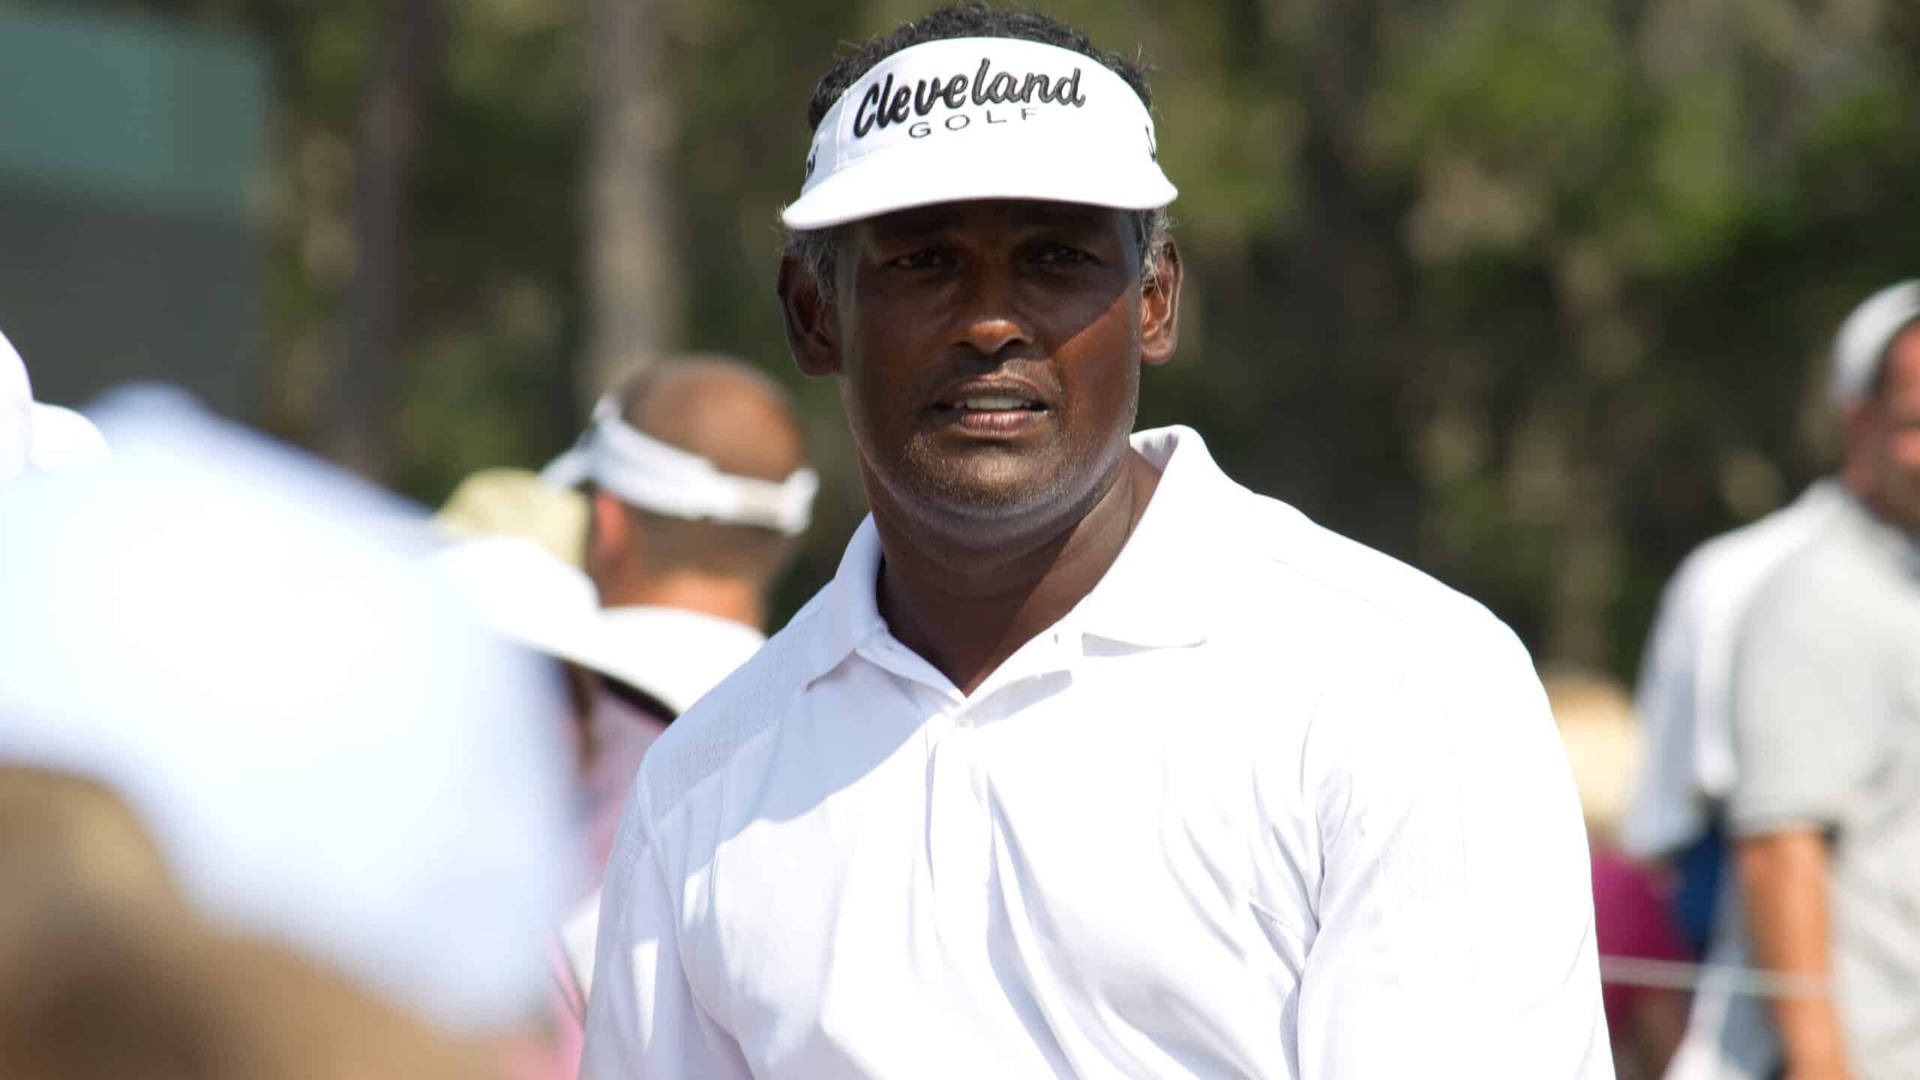 Vijay Singh in Classic White Golf Outfit Wallpaper